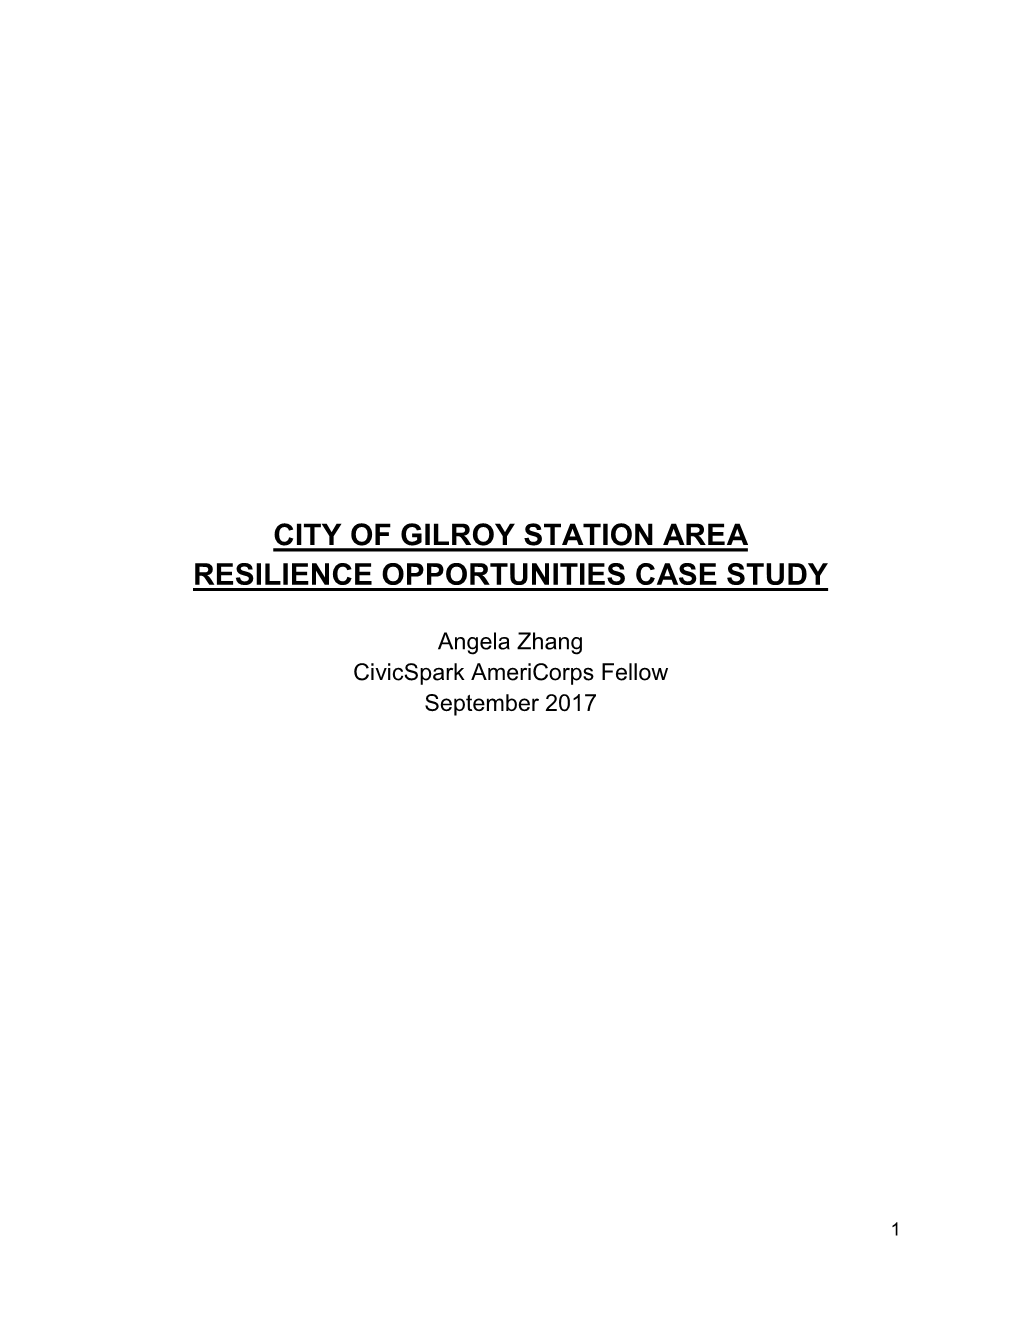 City of Gilroy Station Area Resilience Opportunities Case Study